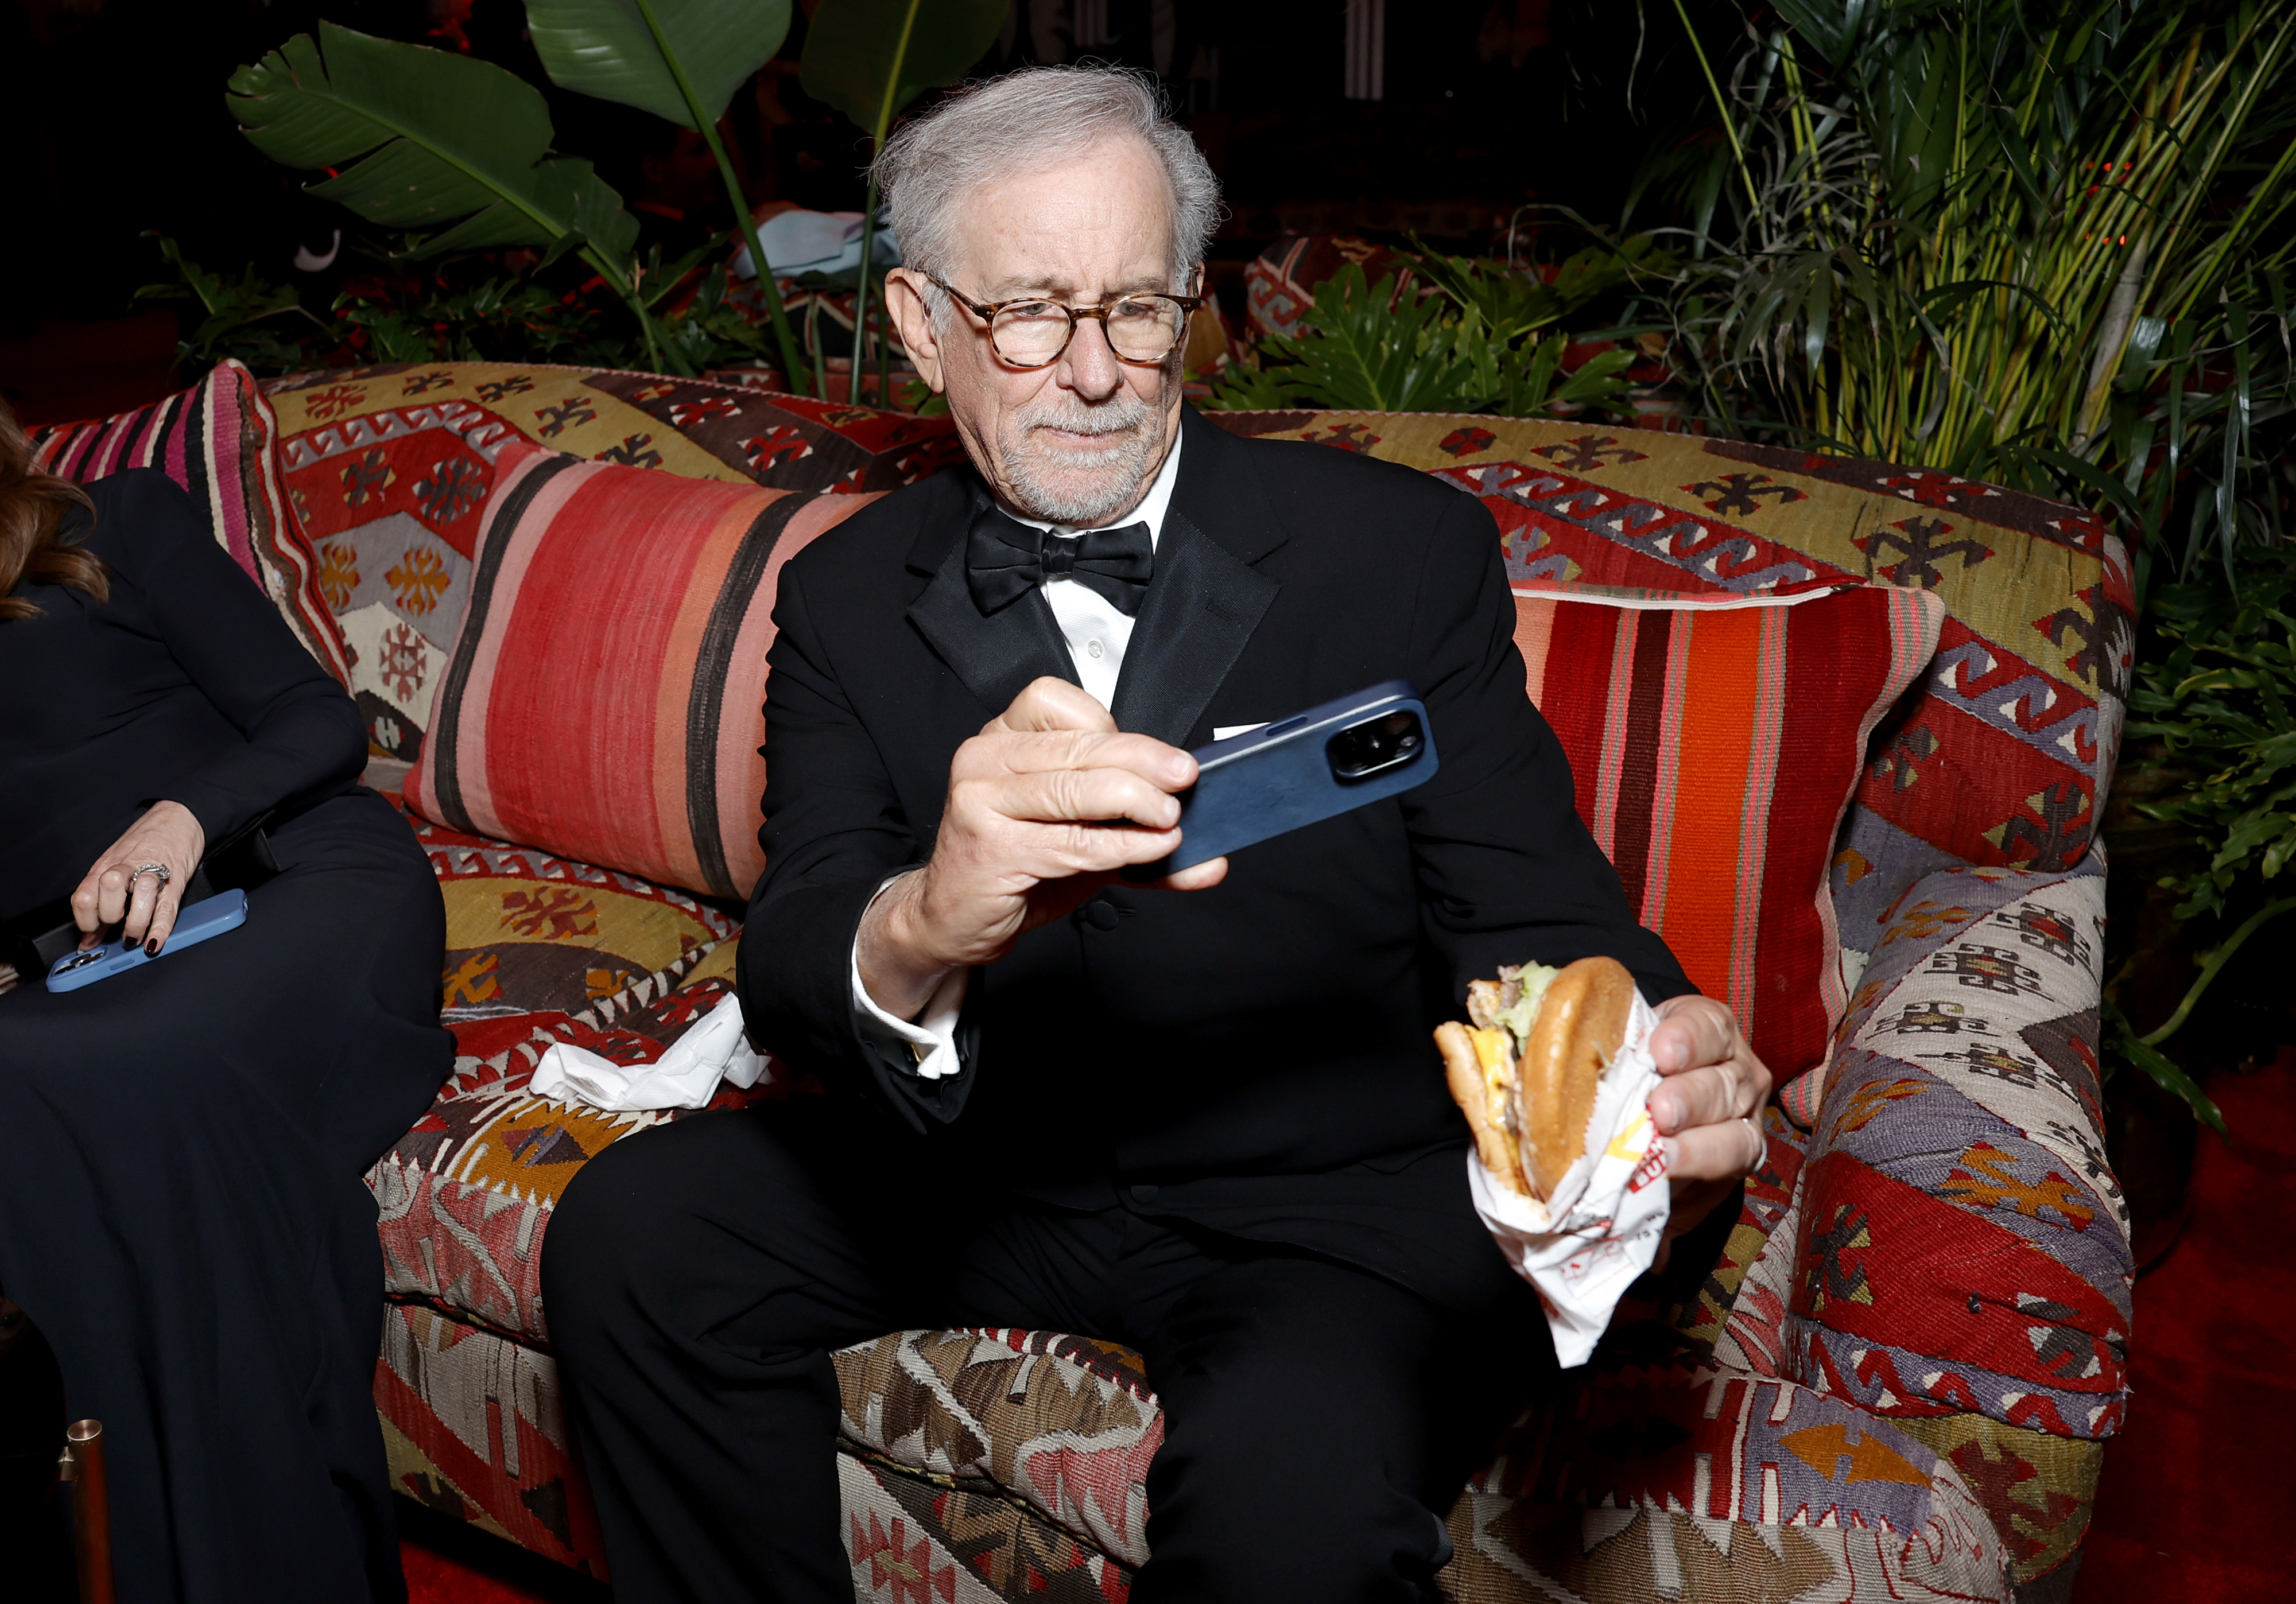 Steven Spielberg in a tuxedo, sitting and taking a pic of his burger